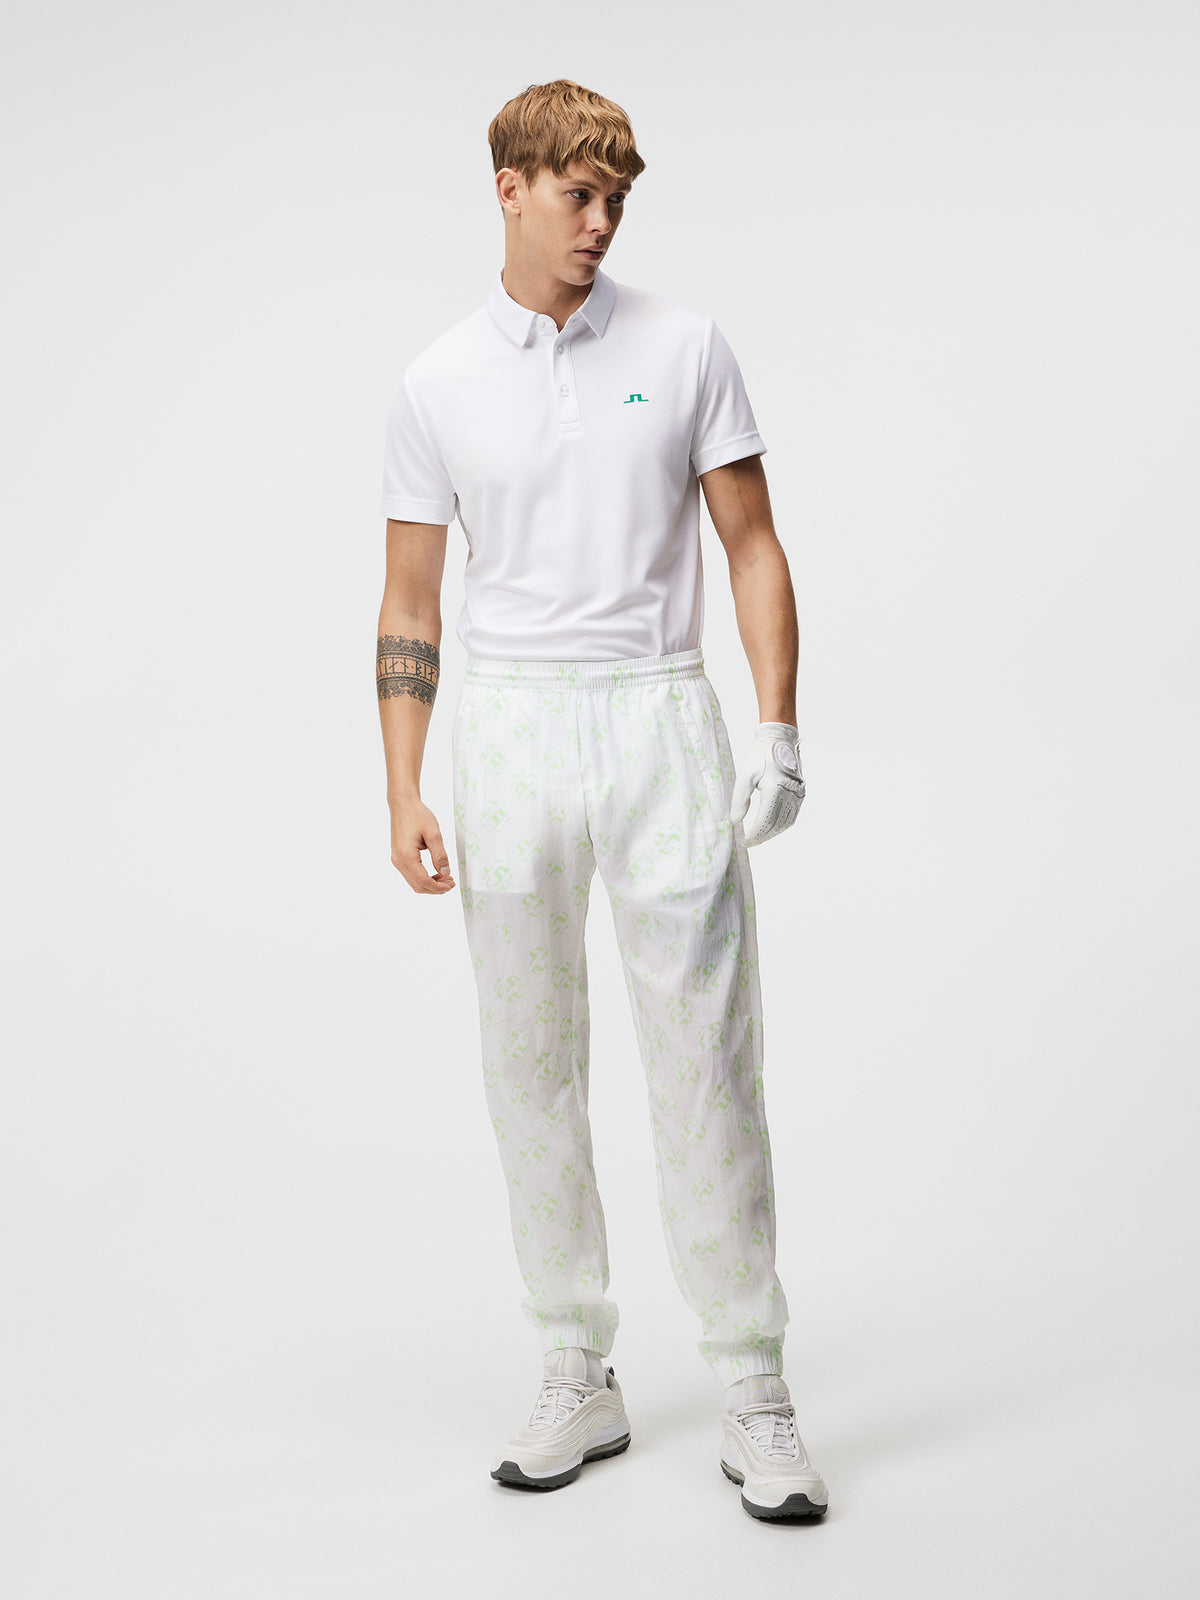 Peat Regular Fit Polo / White